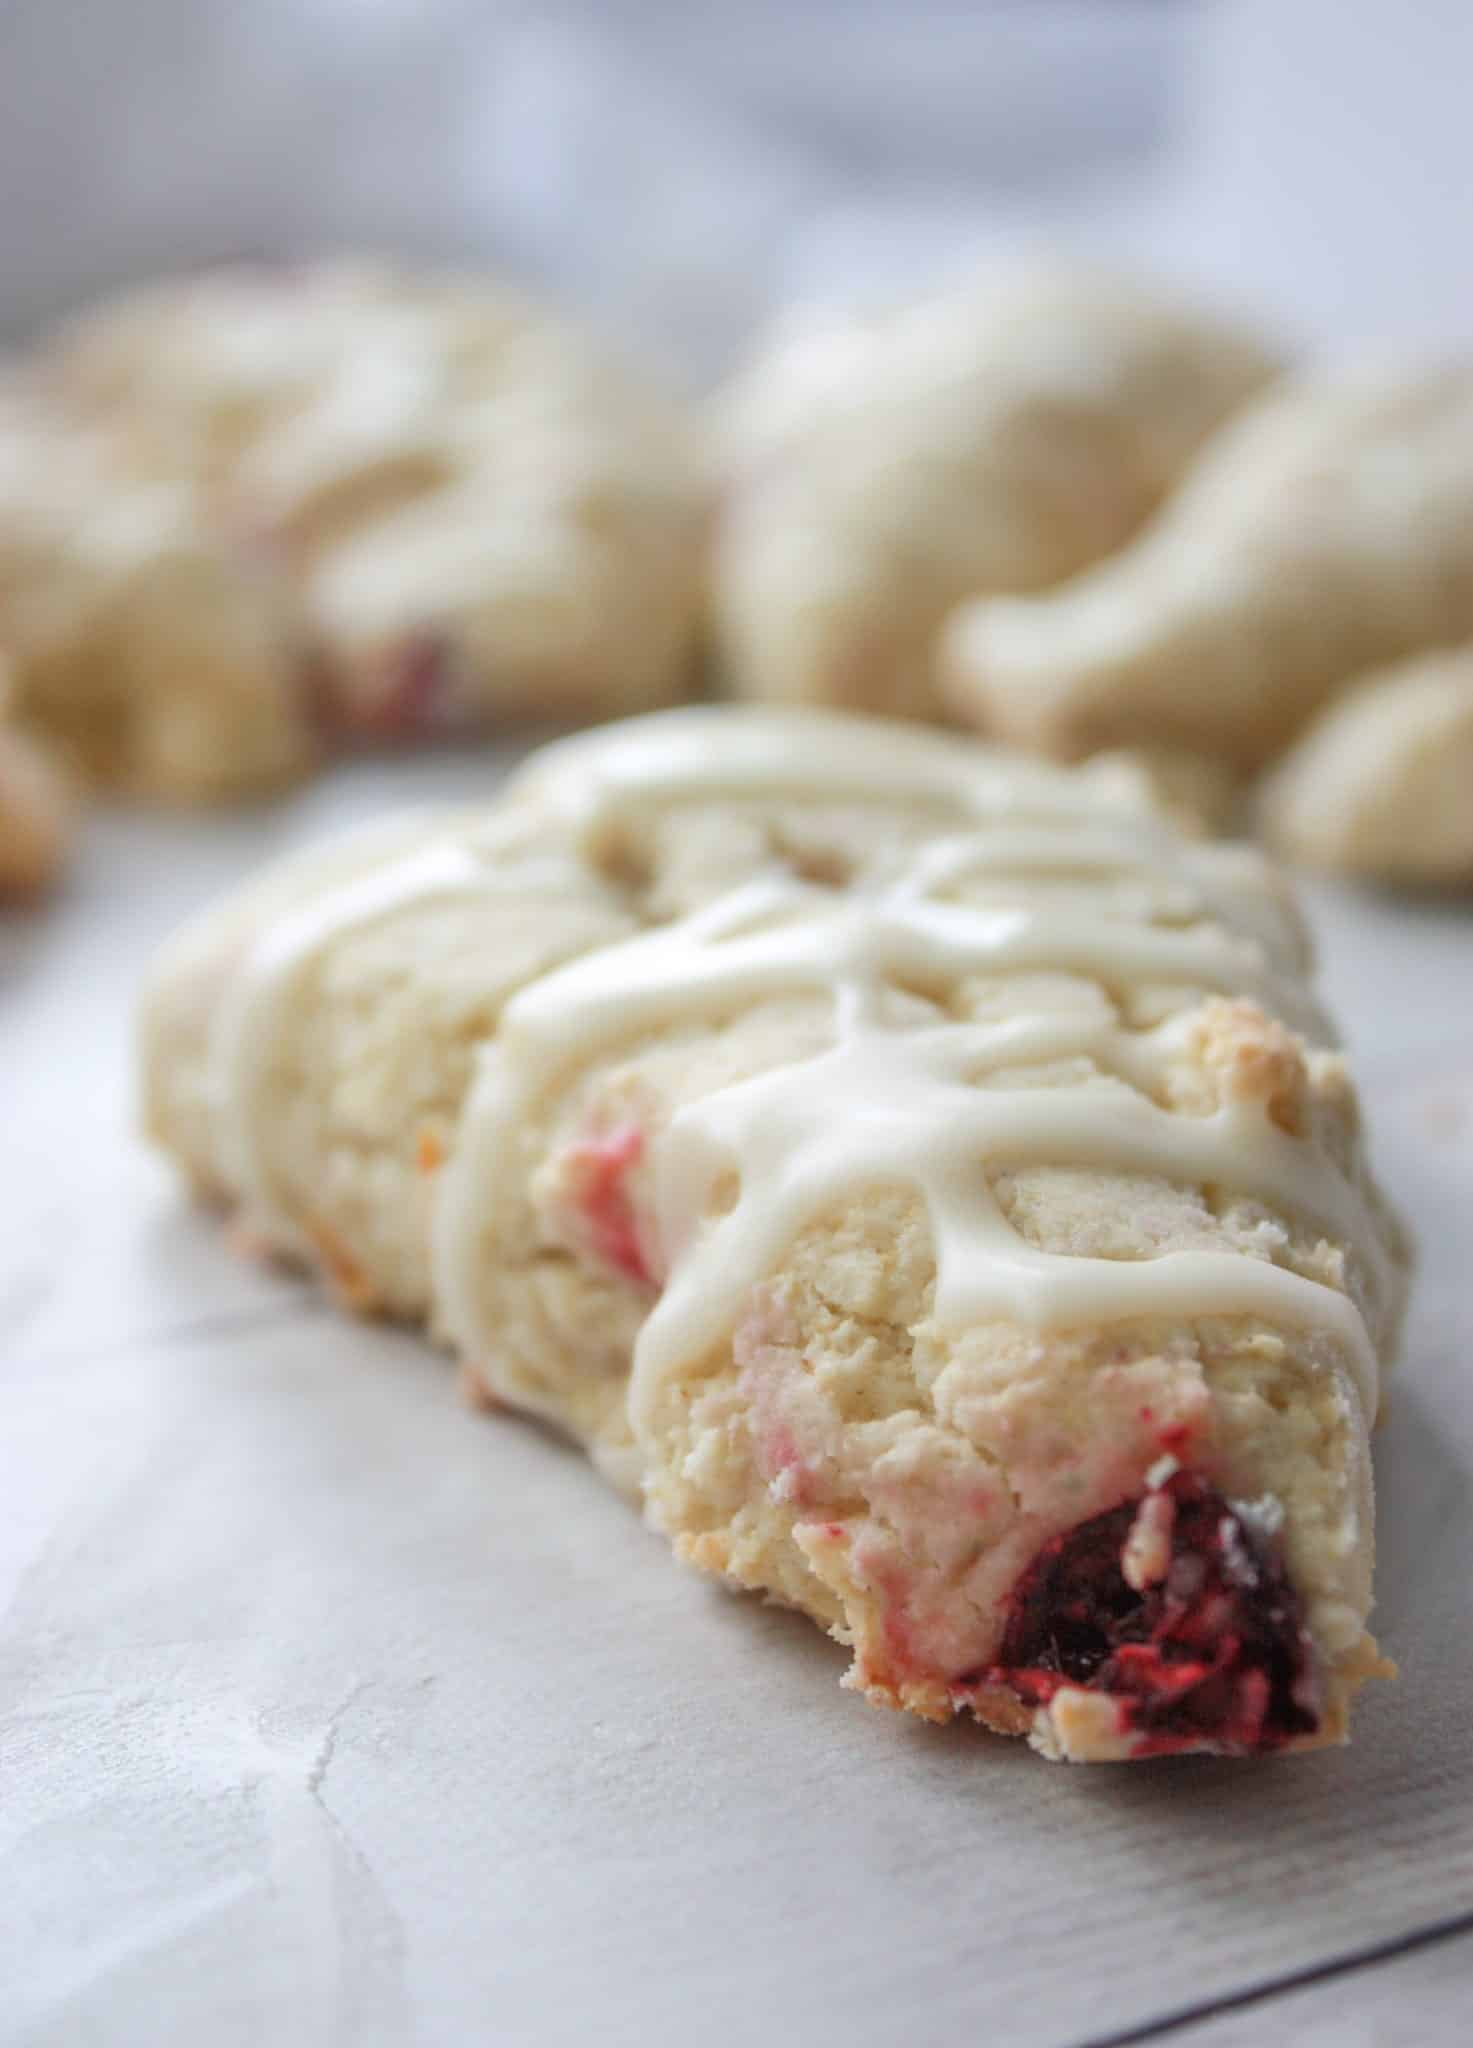 Orange Cranberry Scones are an easy baking recipe with a light, fluffy texture and these gluten free gems are loaded with flavour.